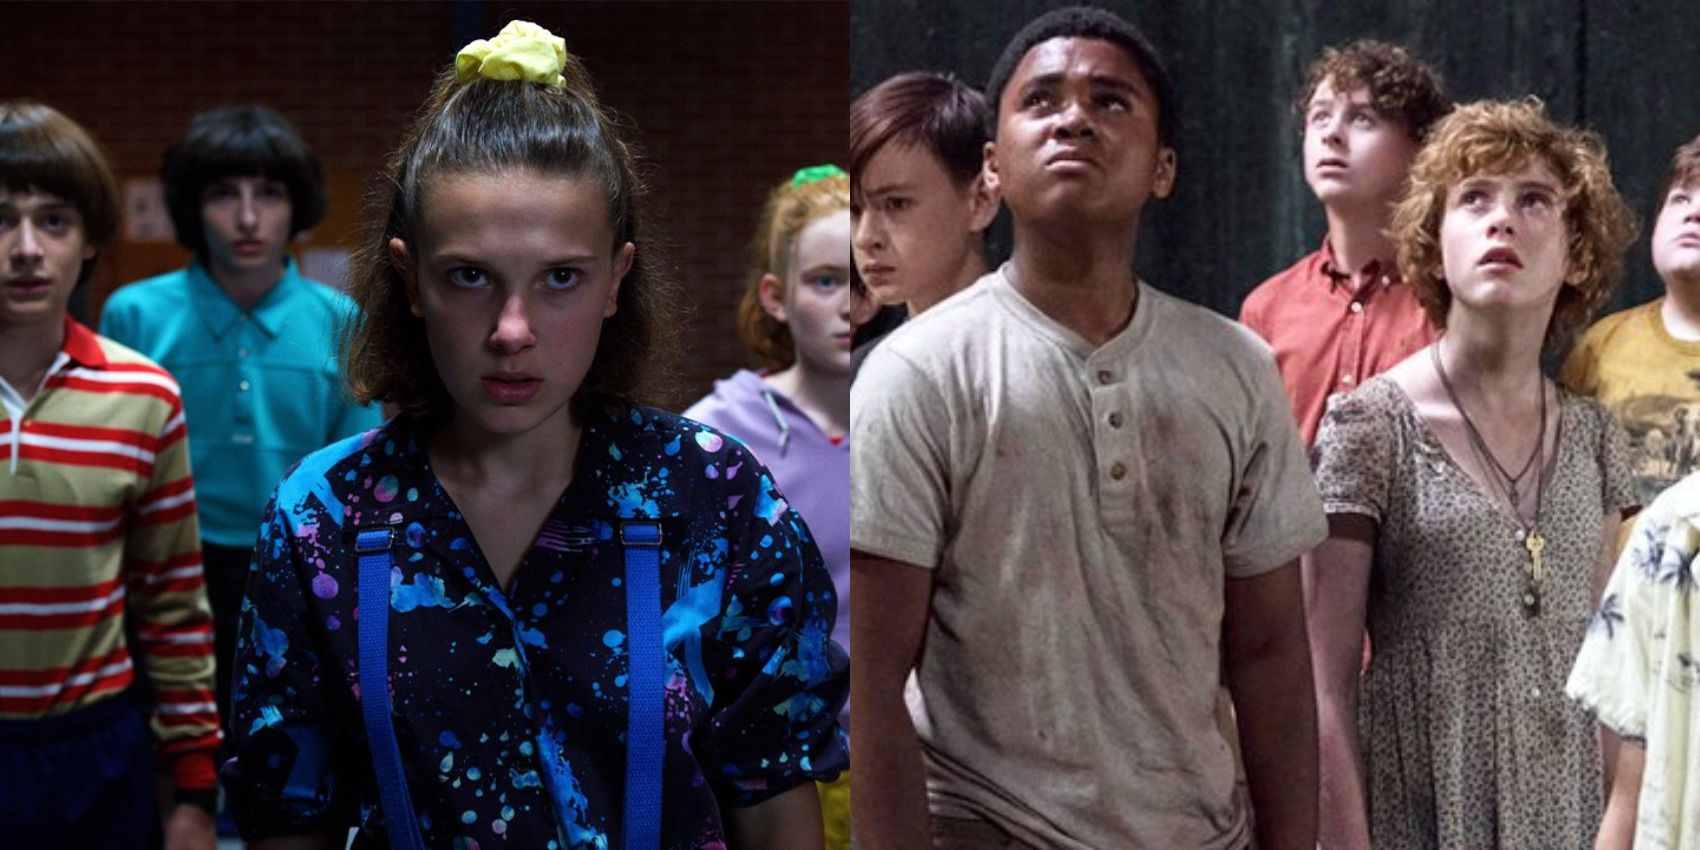 Some of the characters from Stranger Things that make up The Party and some of the characters from It that make up The Losers' Club